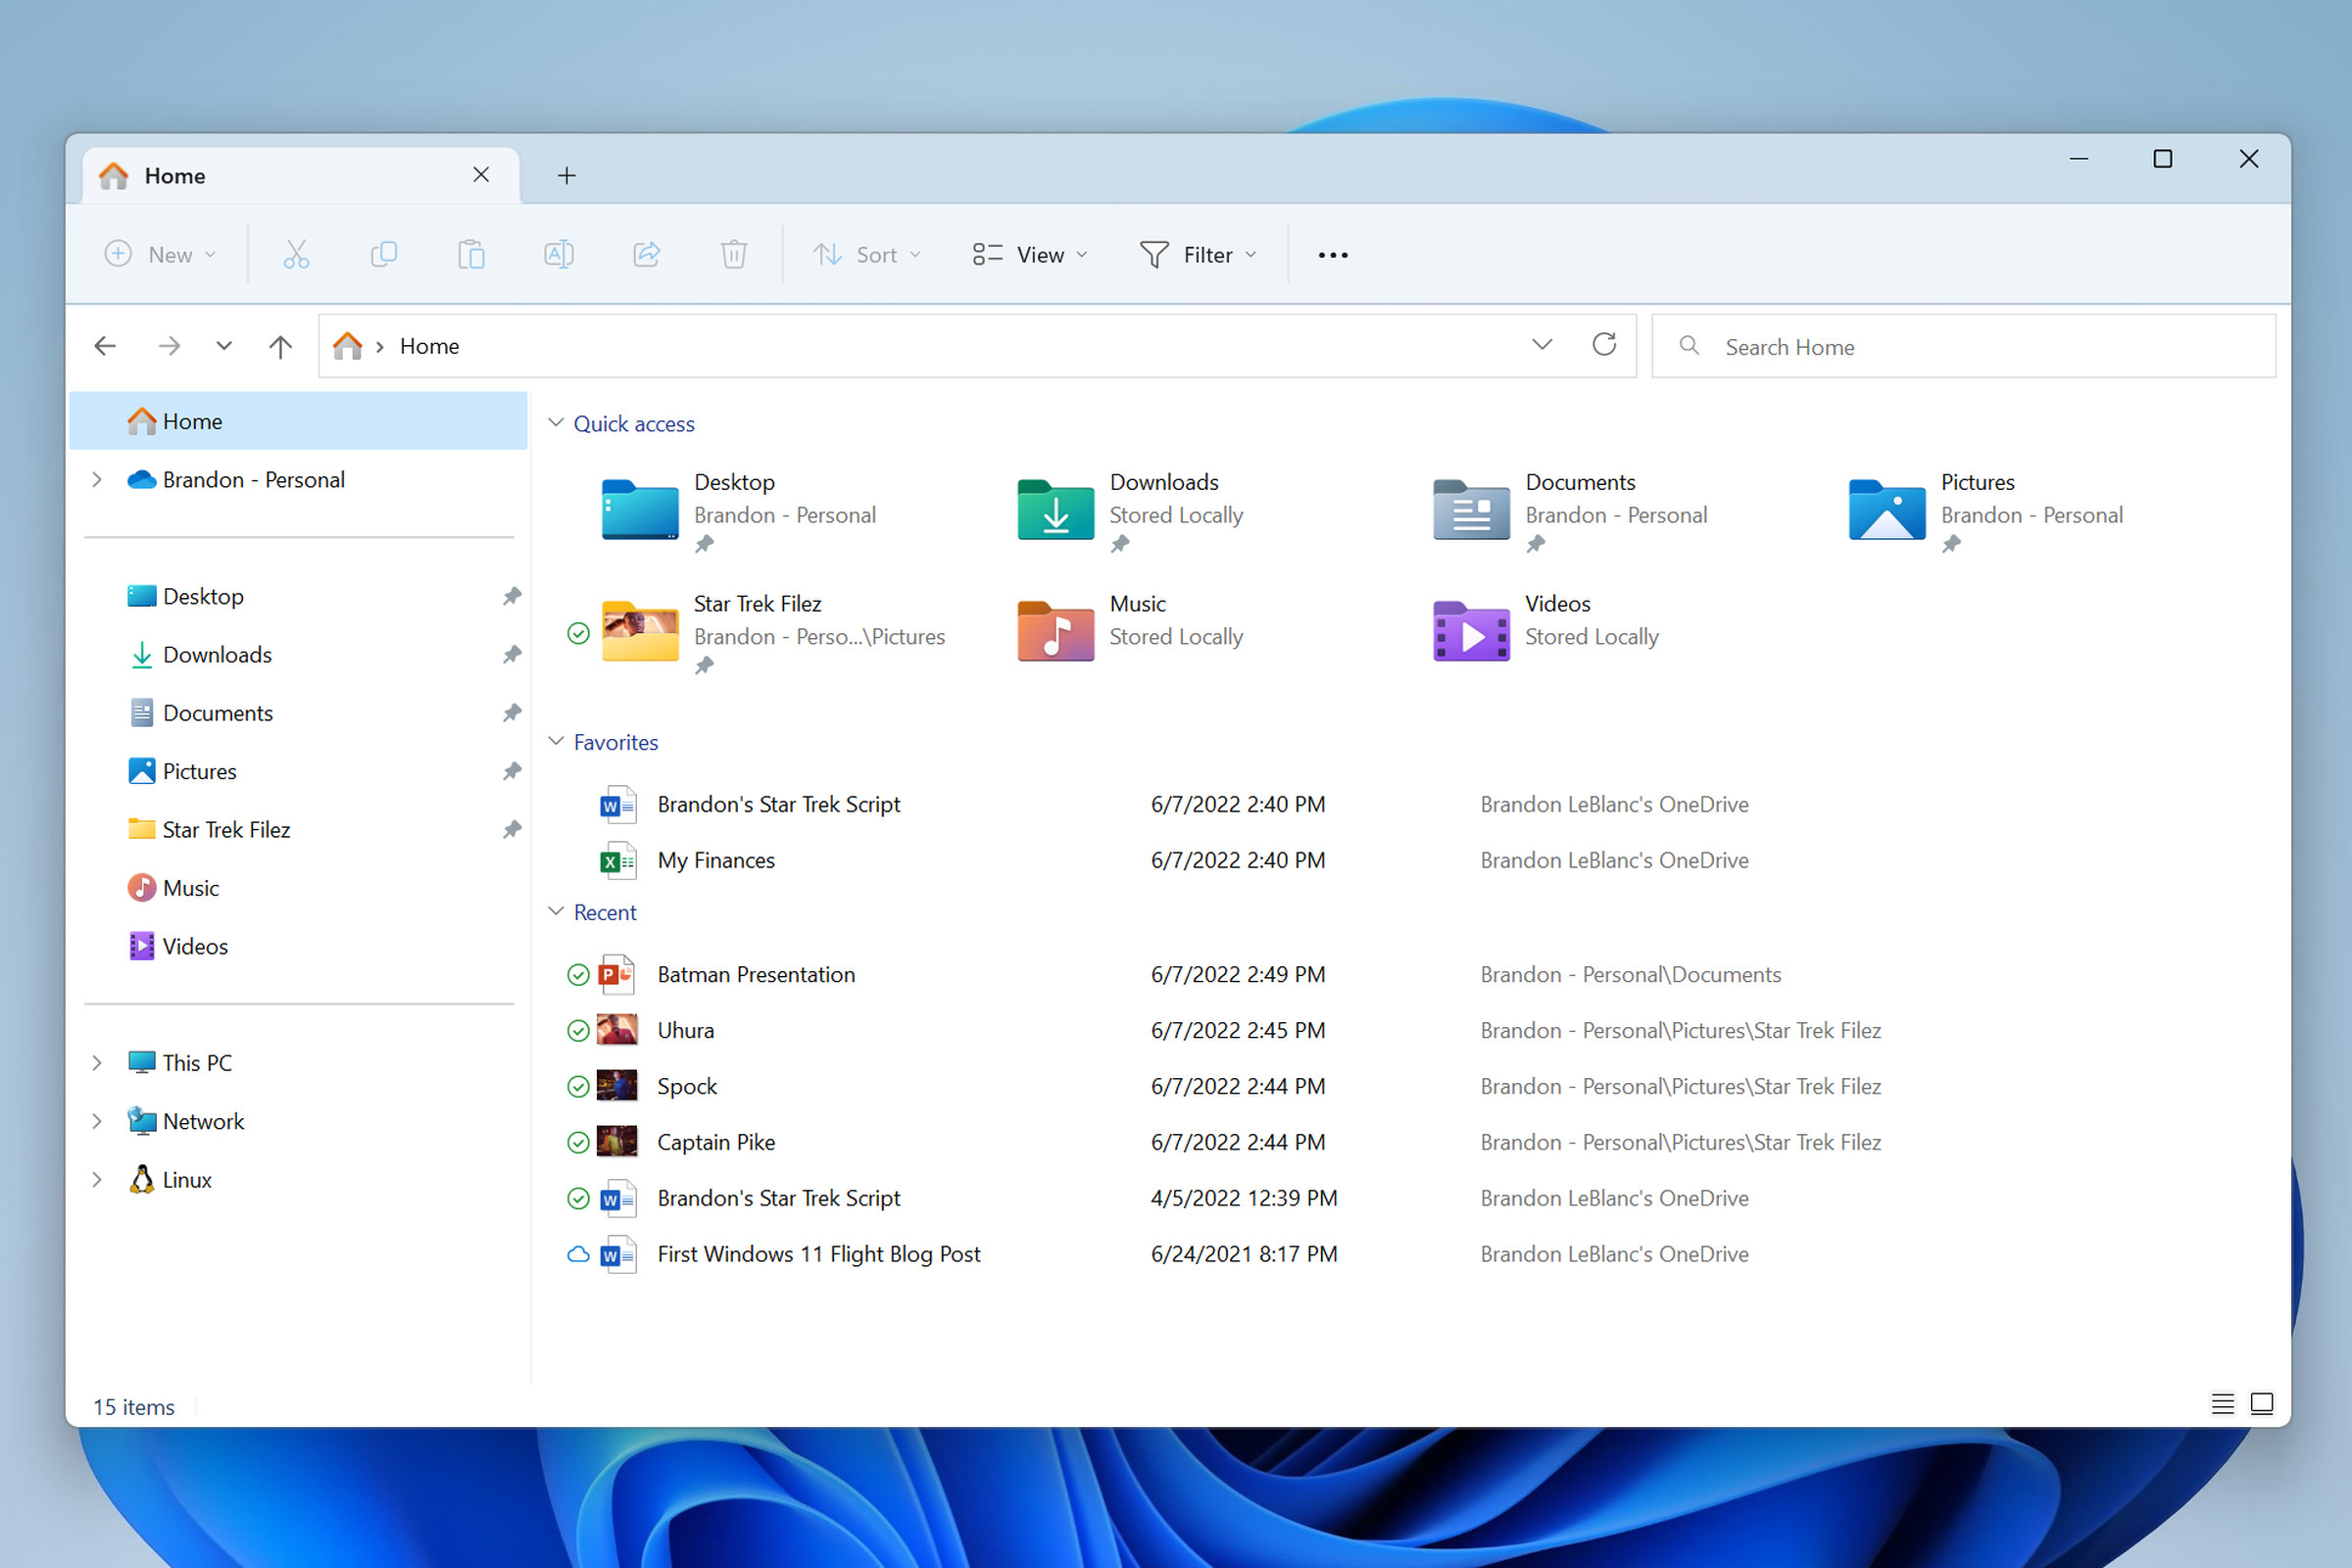 New File Explorer tabs are coming soon.